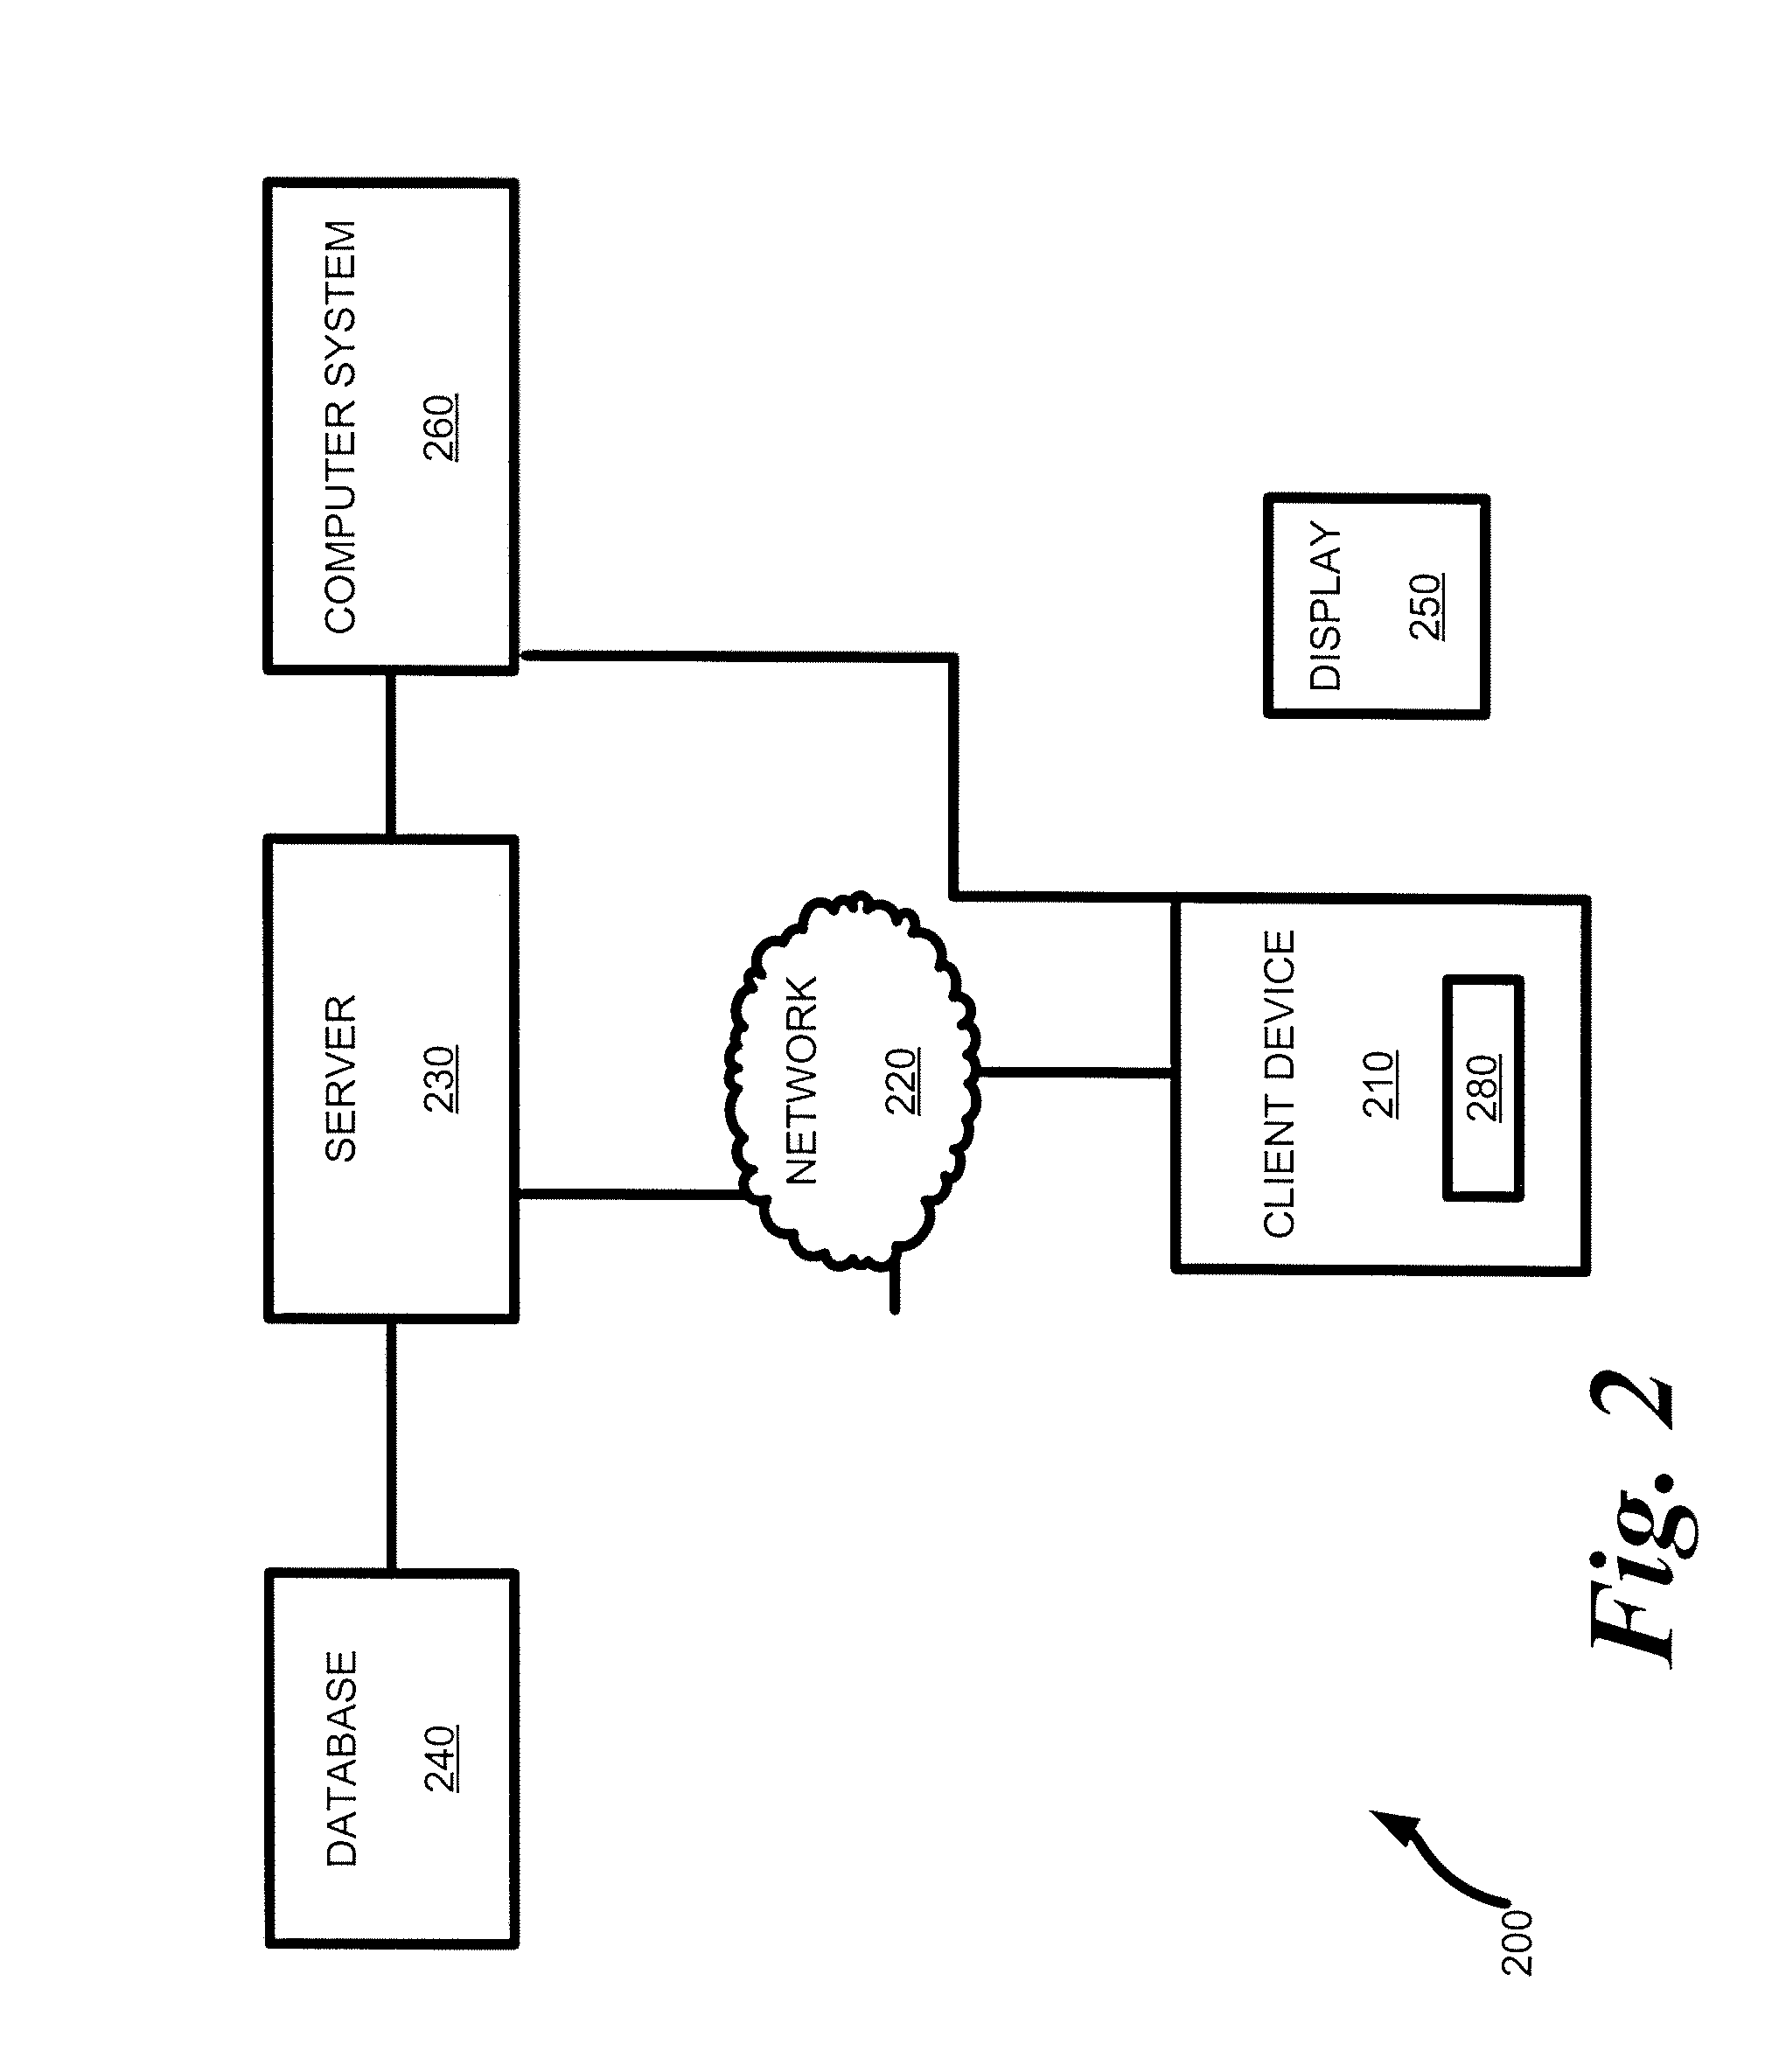 Method and system for organizing tax information and providing tax advice